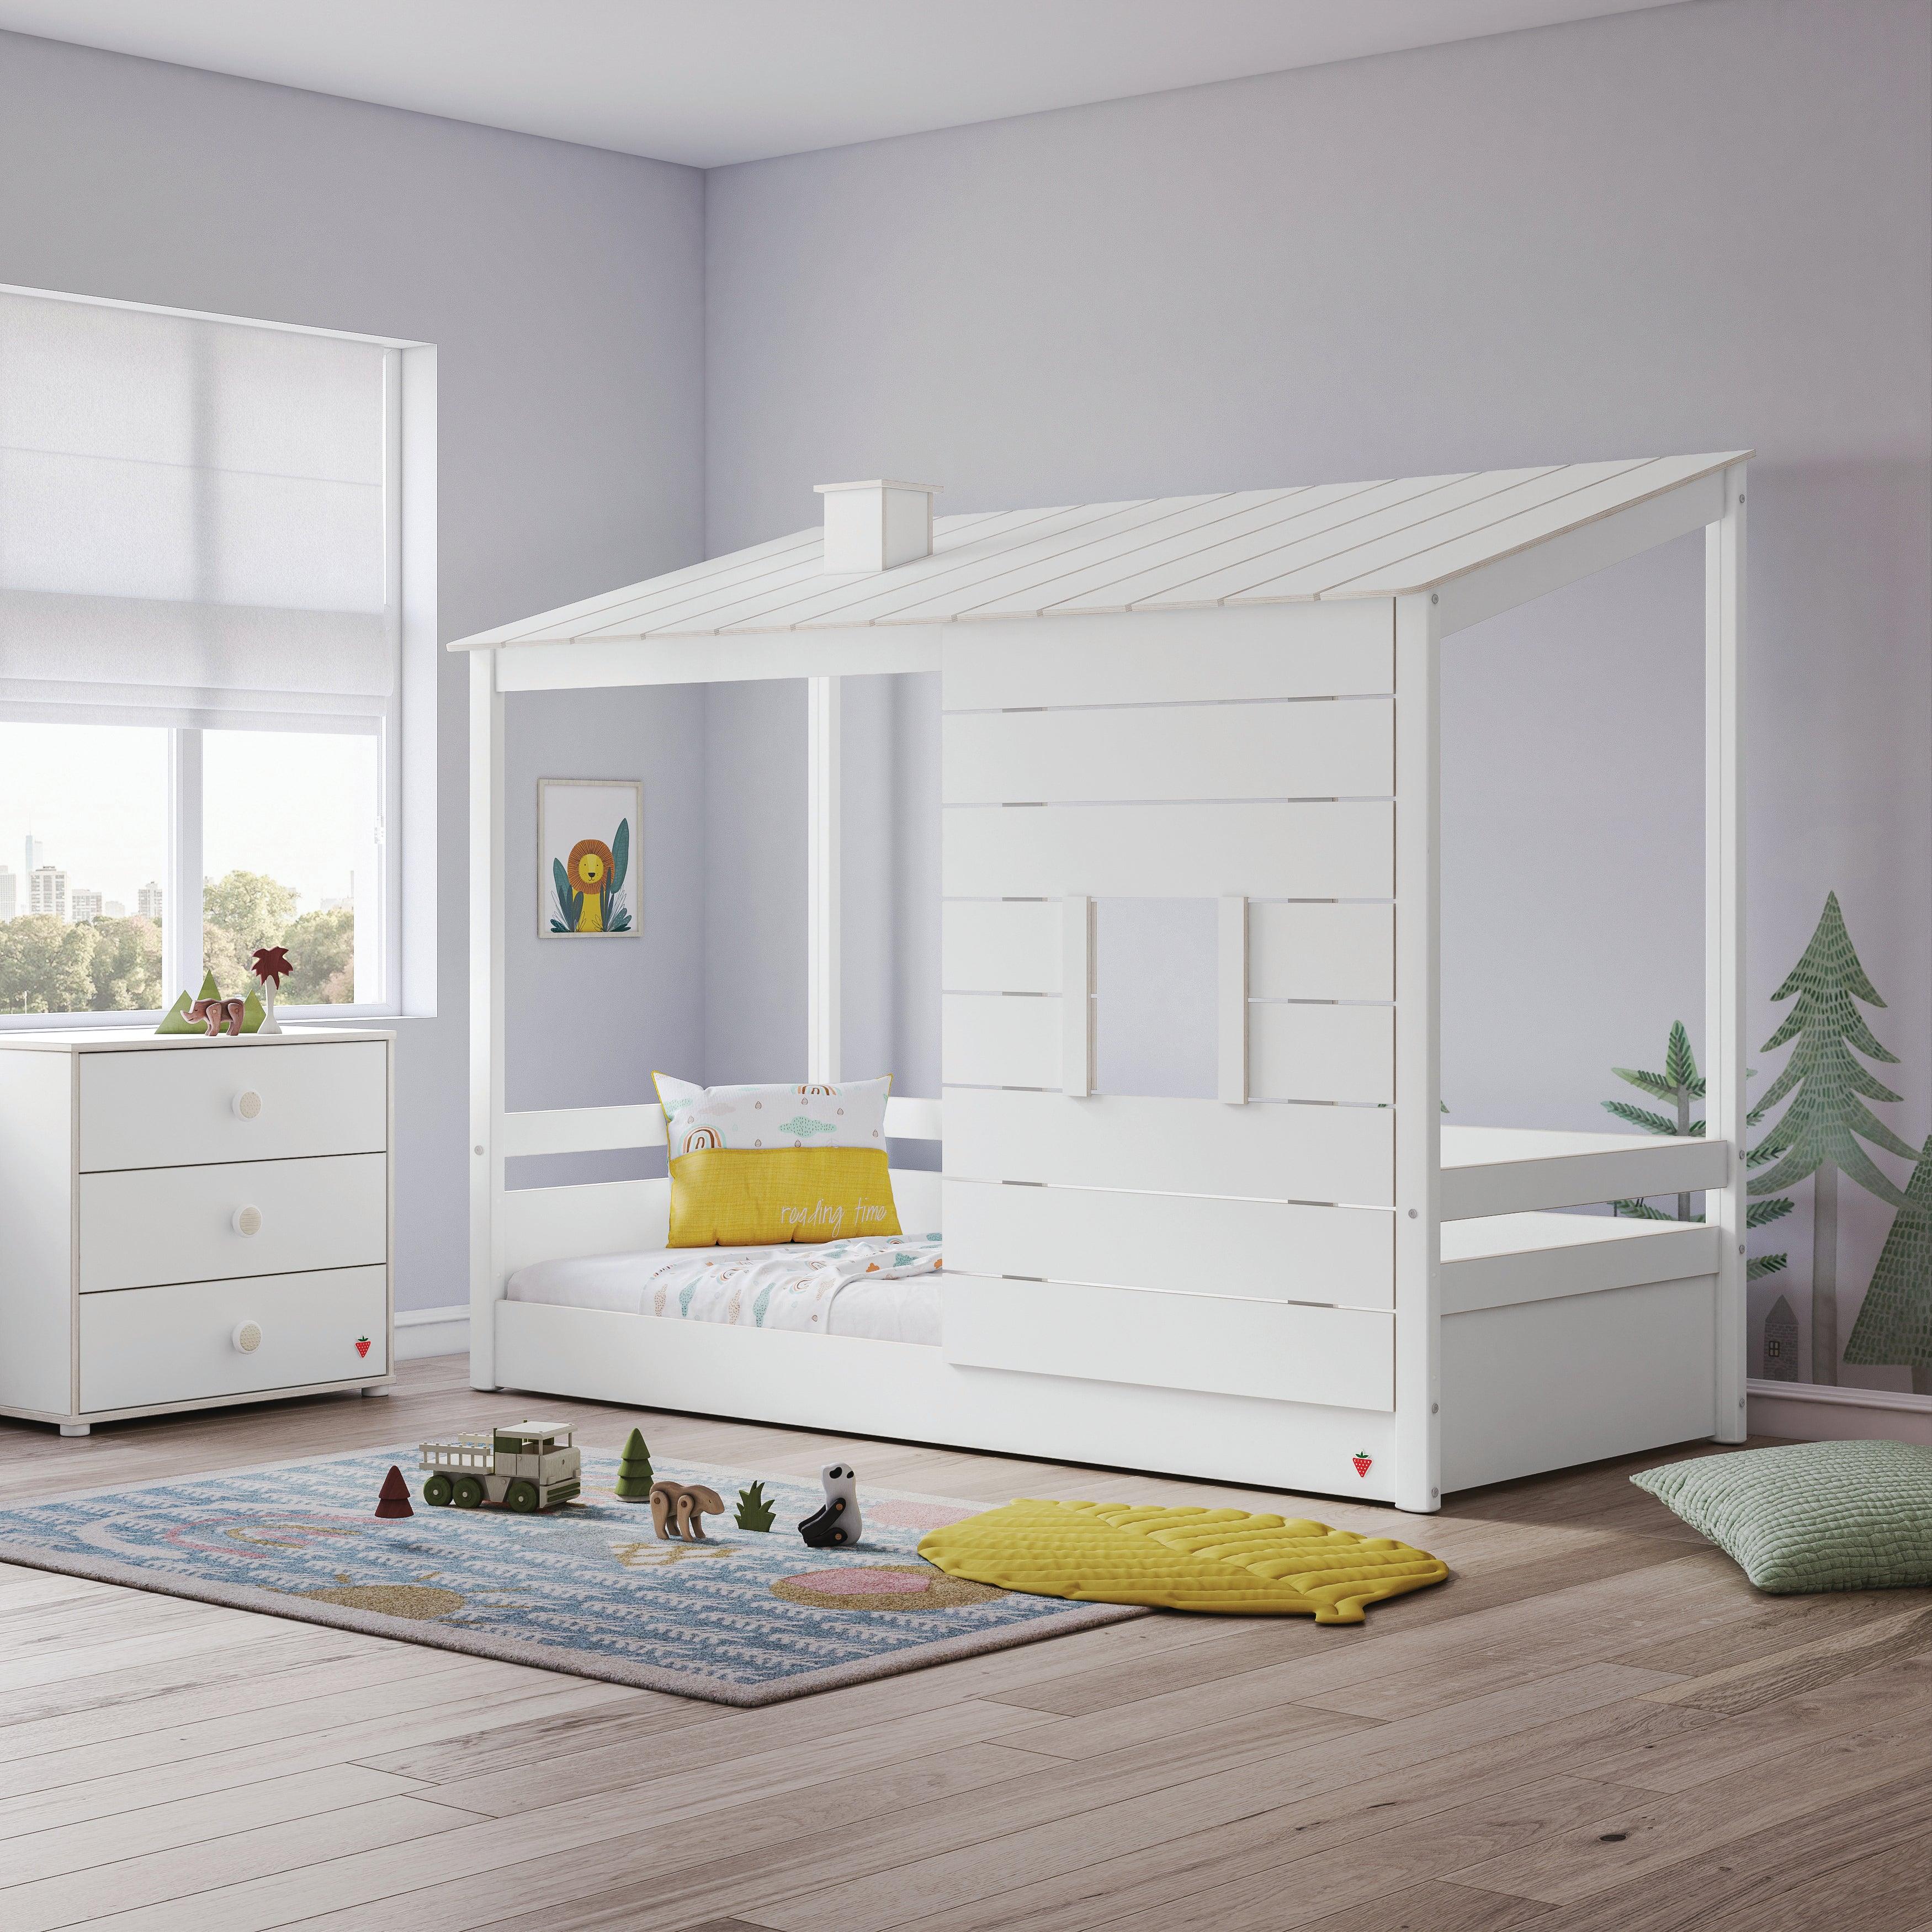 Cilek Montes White Roof Bed (90x200 Cm) - Dual Height - Kids Haven